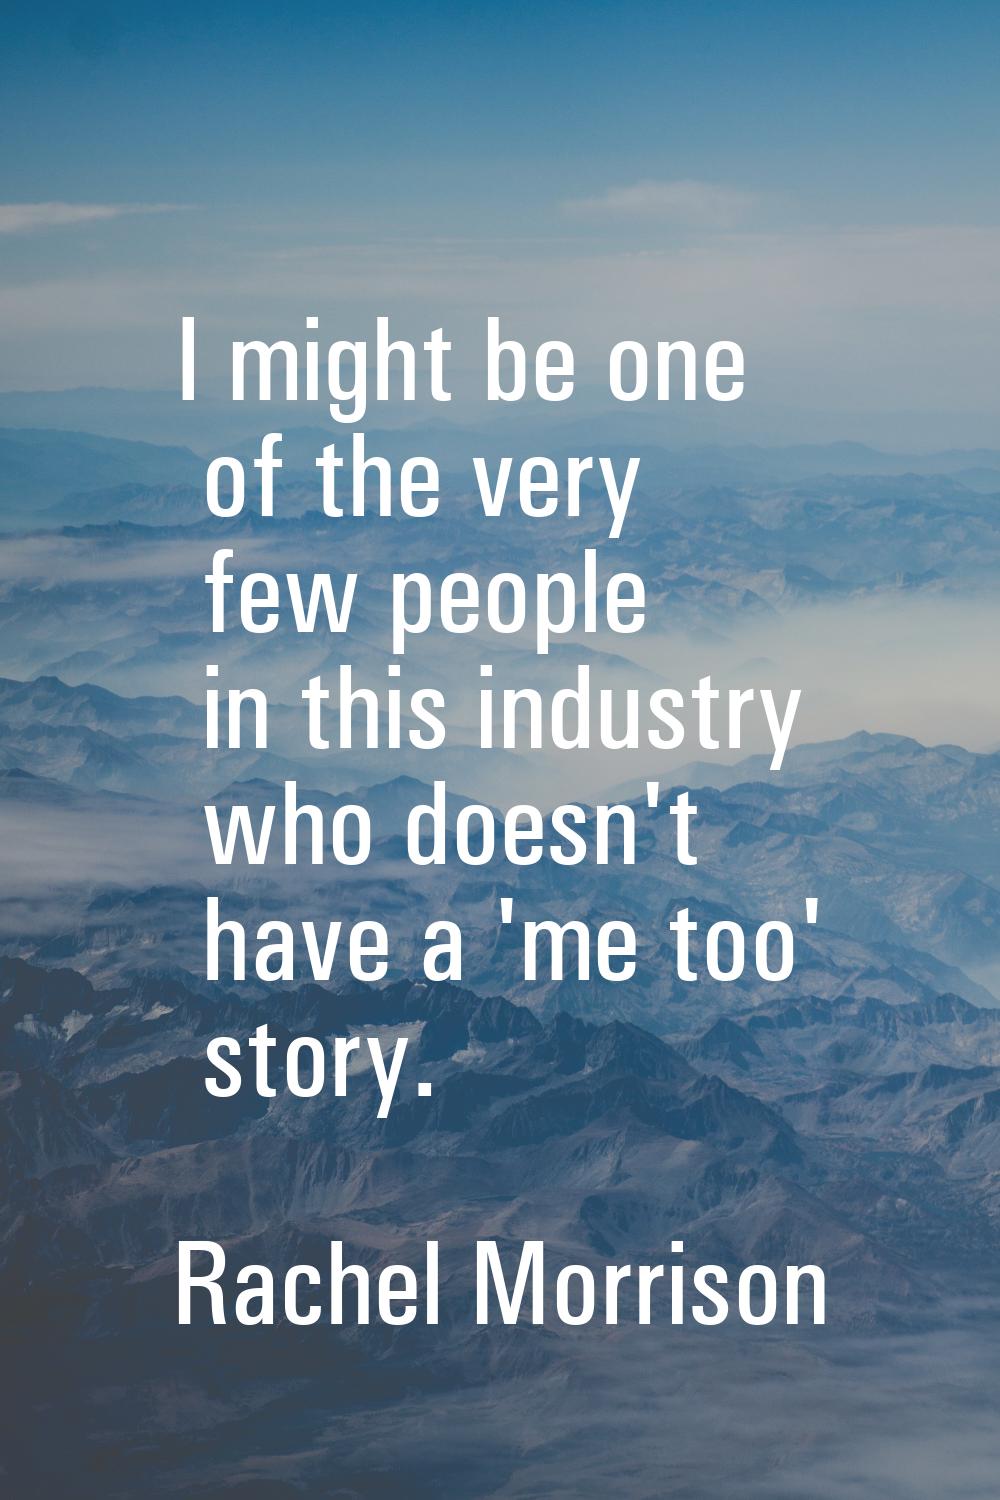 I might be one of the very few people in this industry who doesn't have a 'me too' story.